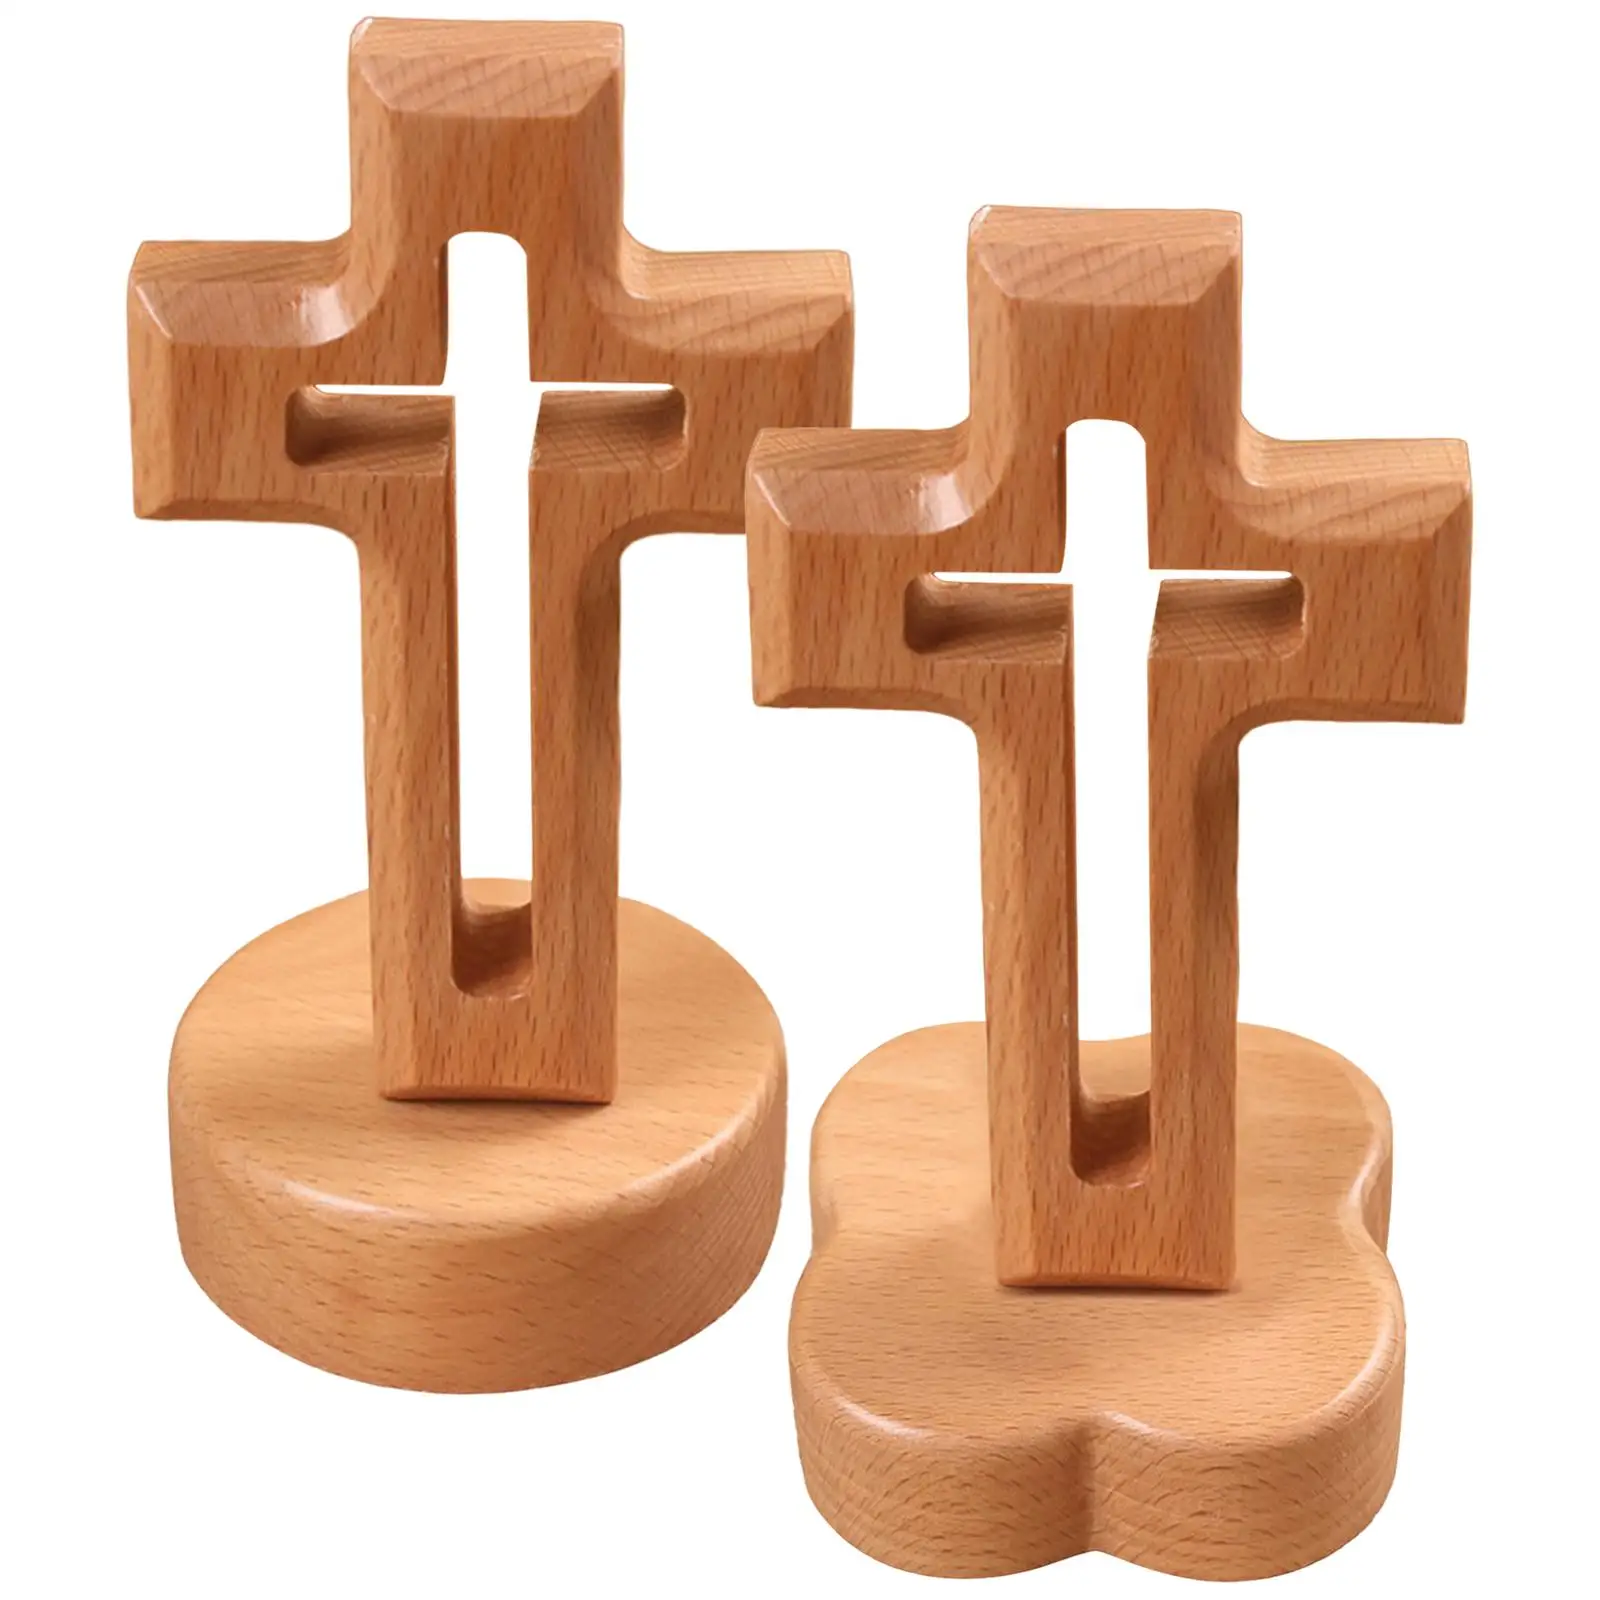 Wooden Cross Ornament Free Standing Crucifix for Living Room Bedroom Study